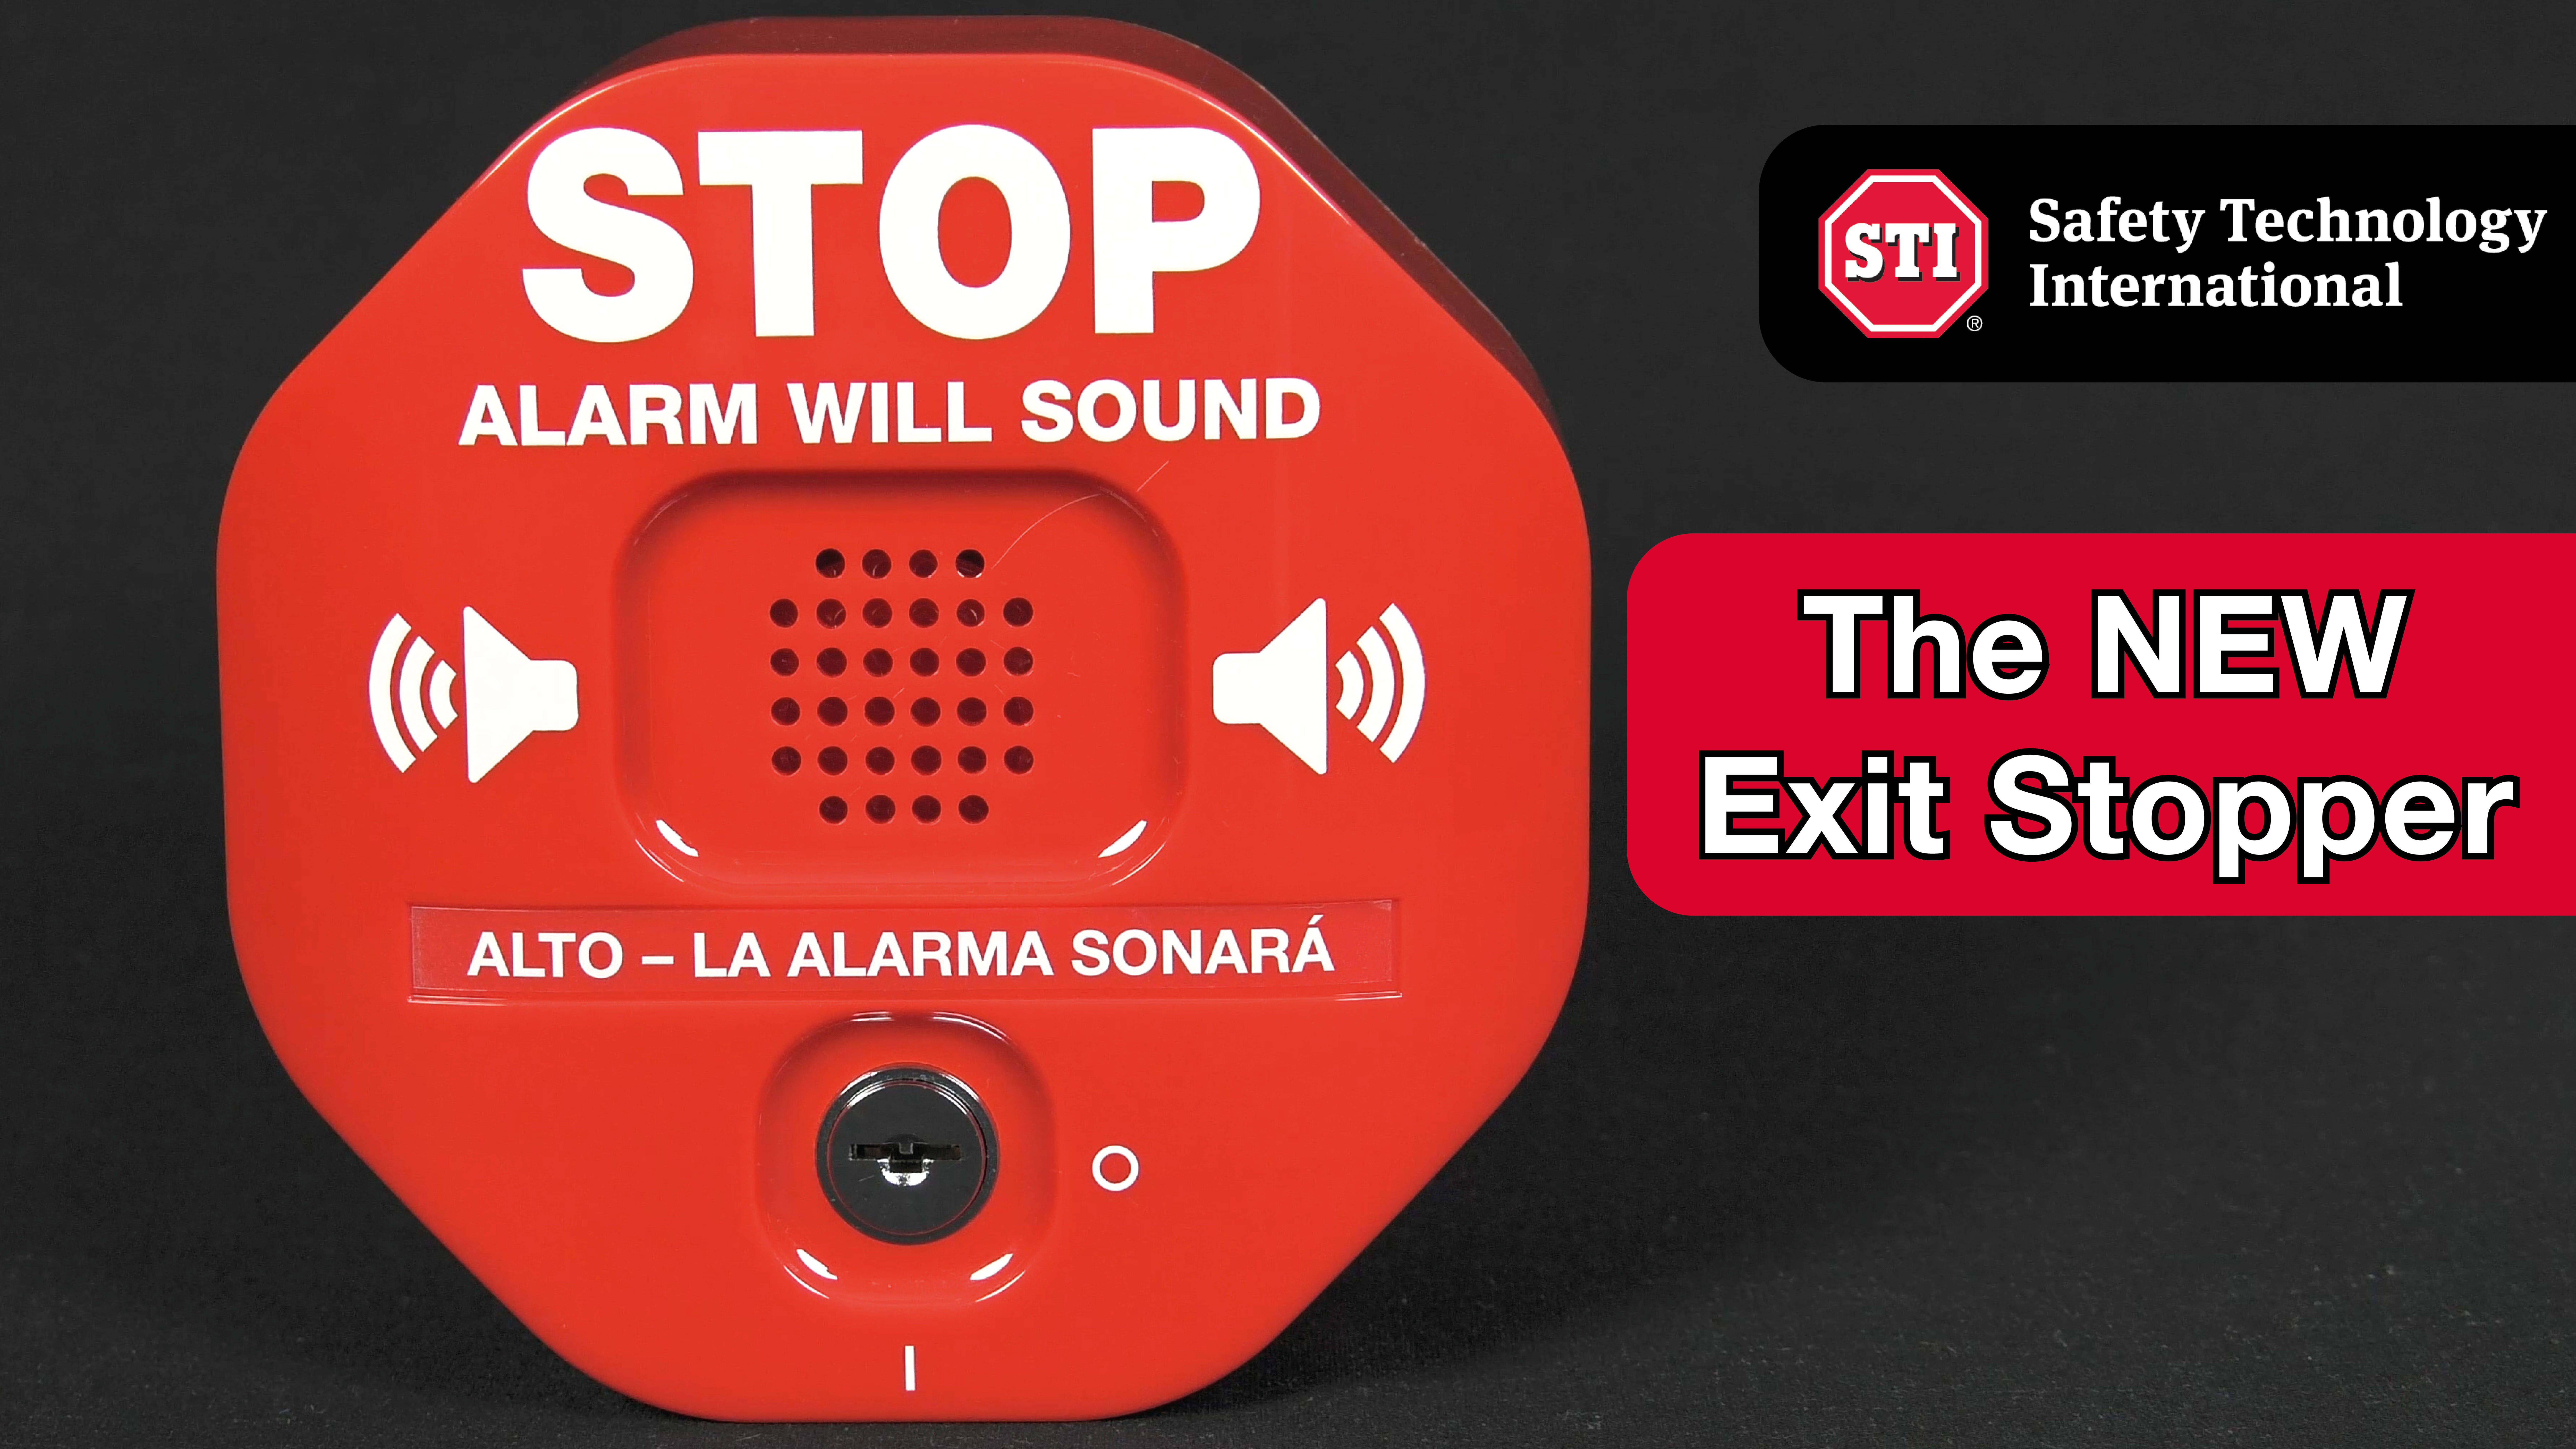 STI 6400 Exit Stopper - NEW Product Features